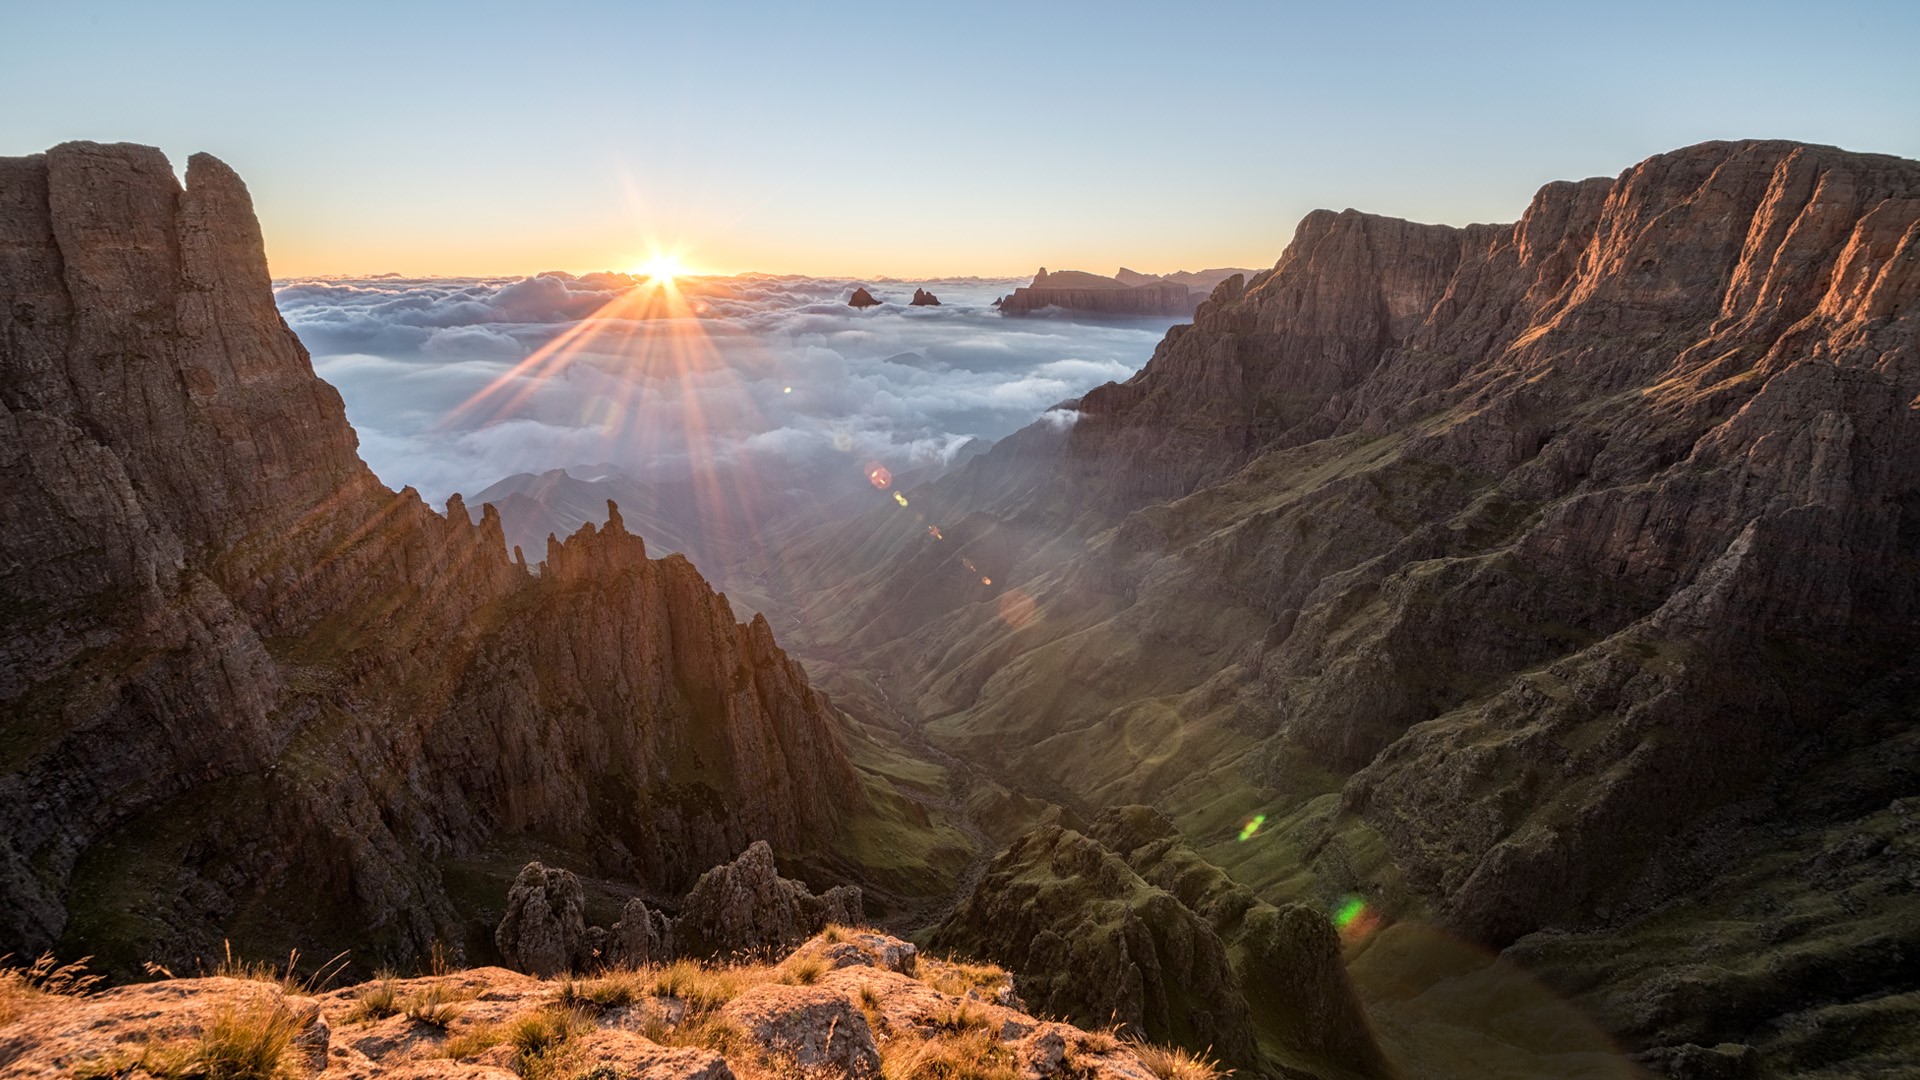  Sunrise  in the Drakensberg looking towards Madonna and her 